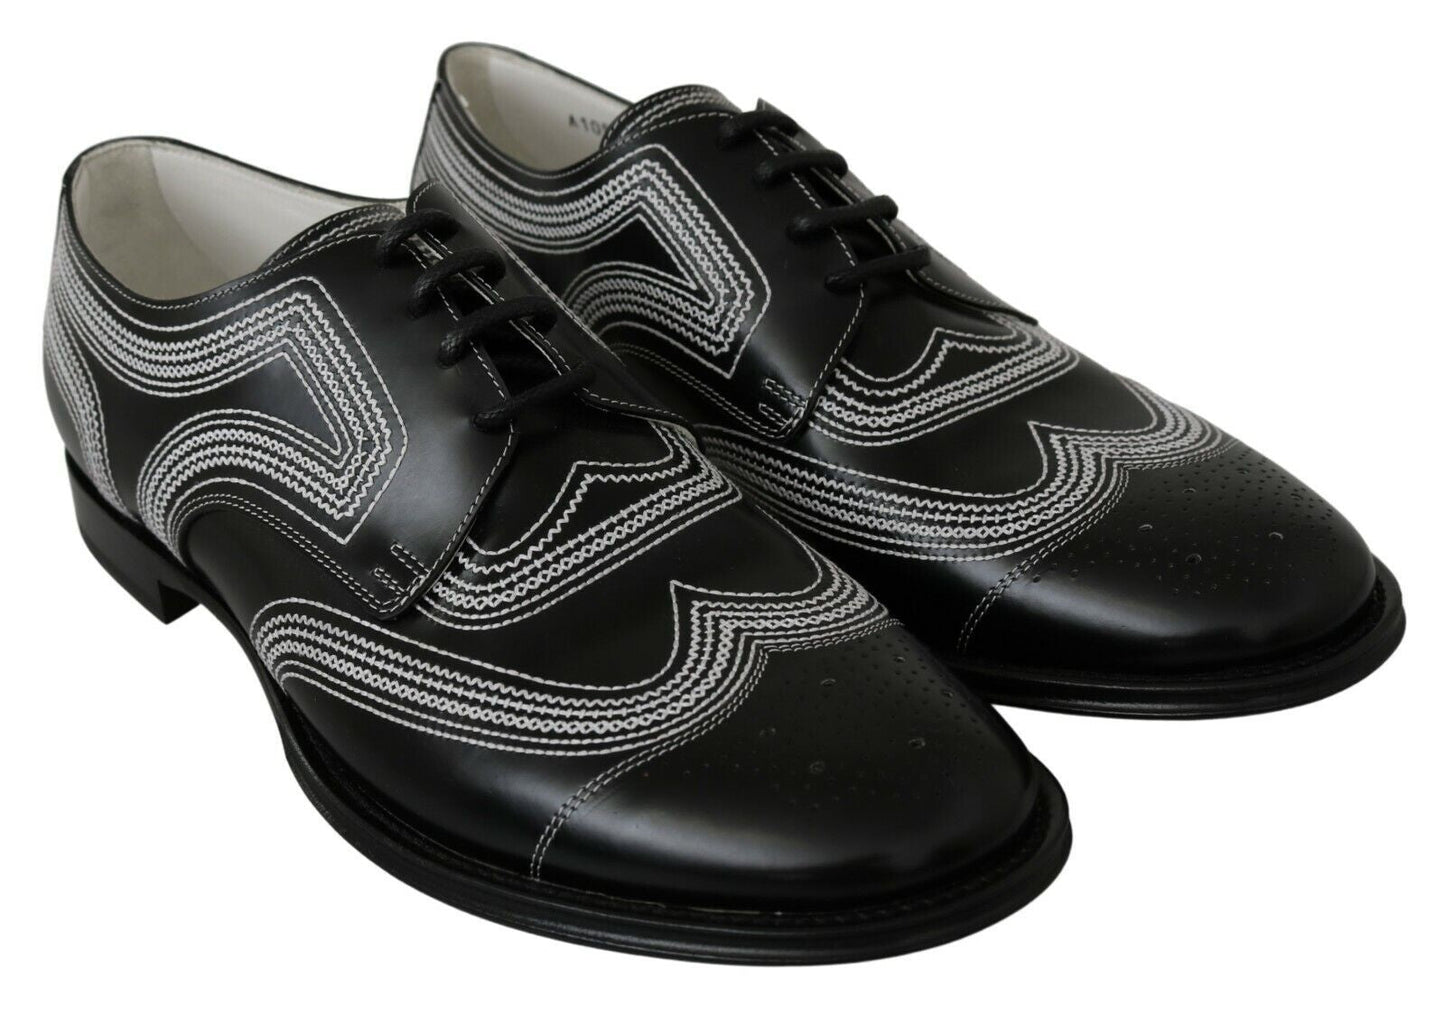 Dolce & Gabbana Black Leather Derby Formal White Lace Shoes | Fashionsarah.com